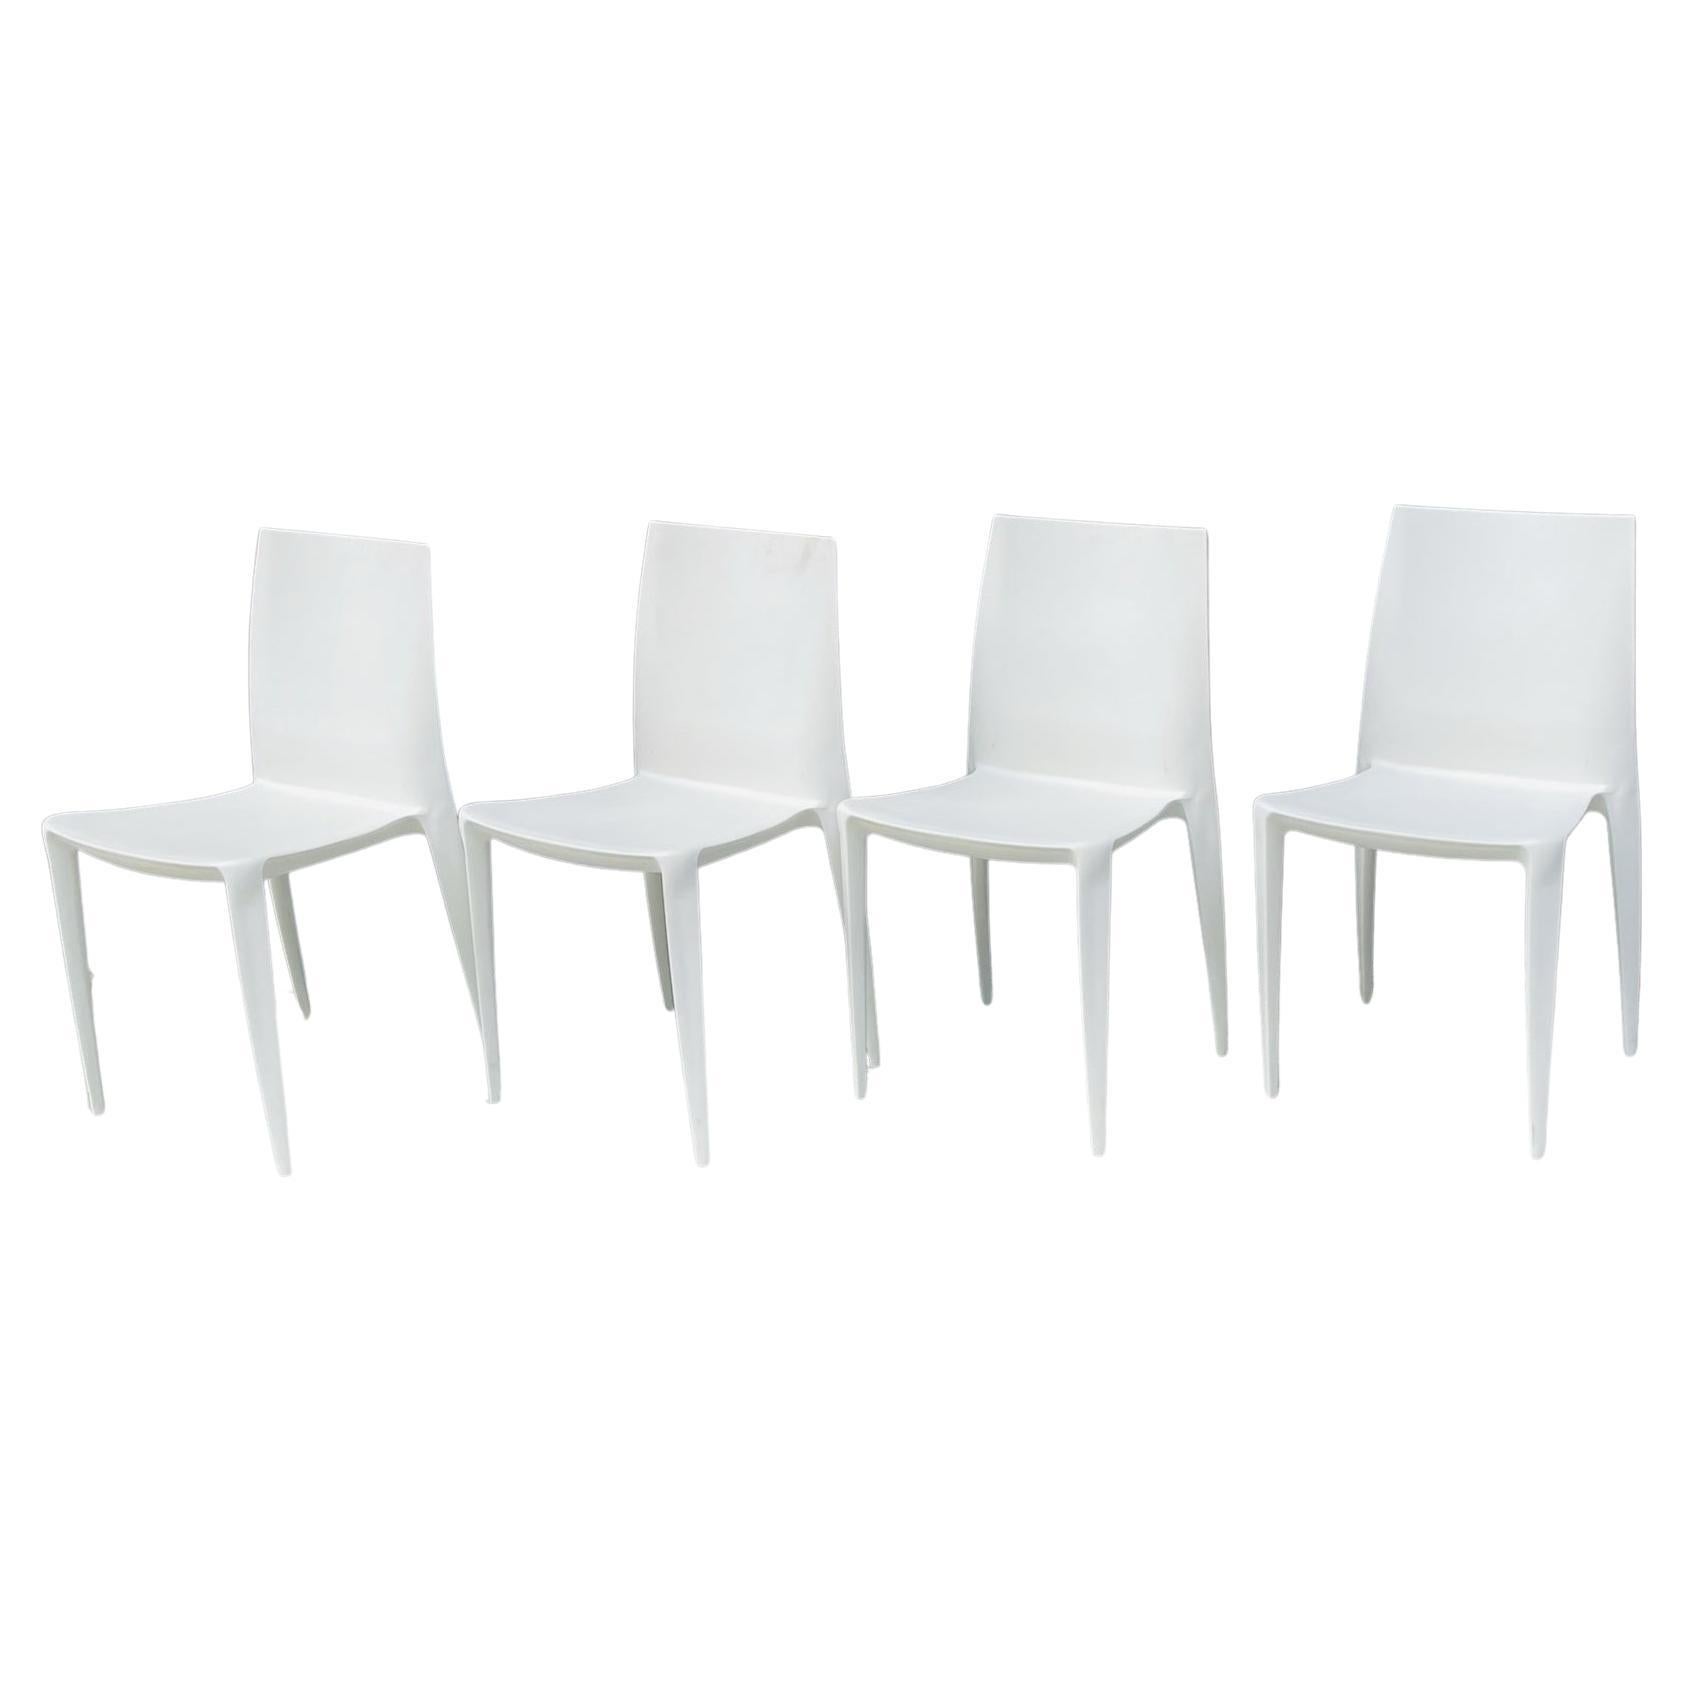 Set of 4 Chairs by Mario Bellini for Heller